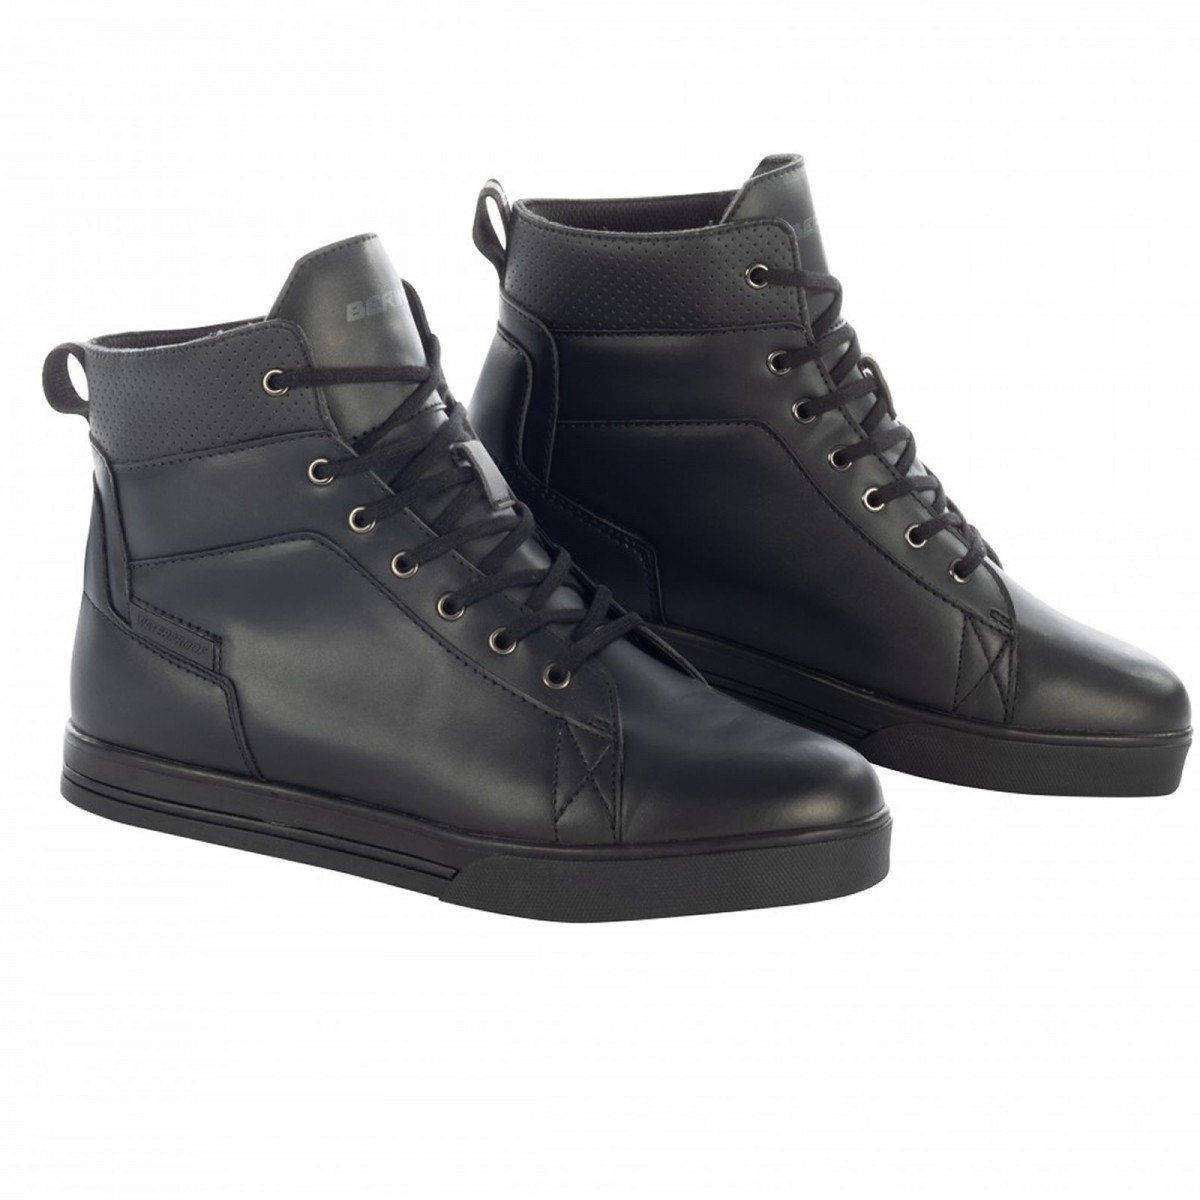 Image of Bering Indy Noir Chaussures Taille 44